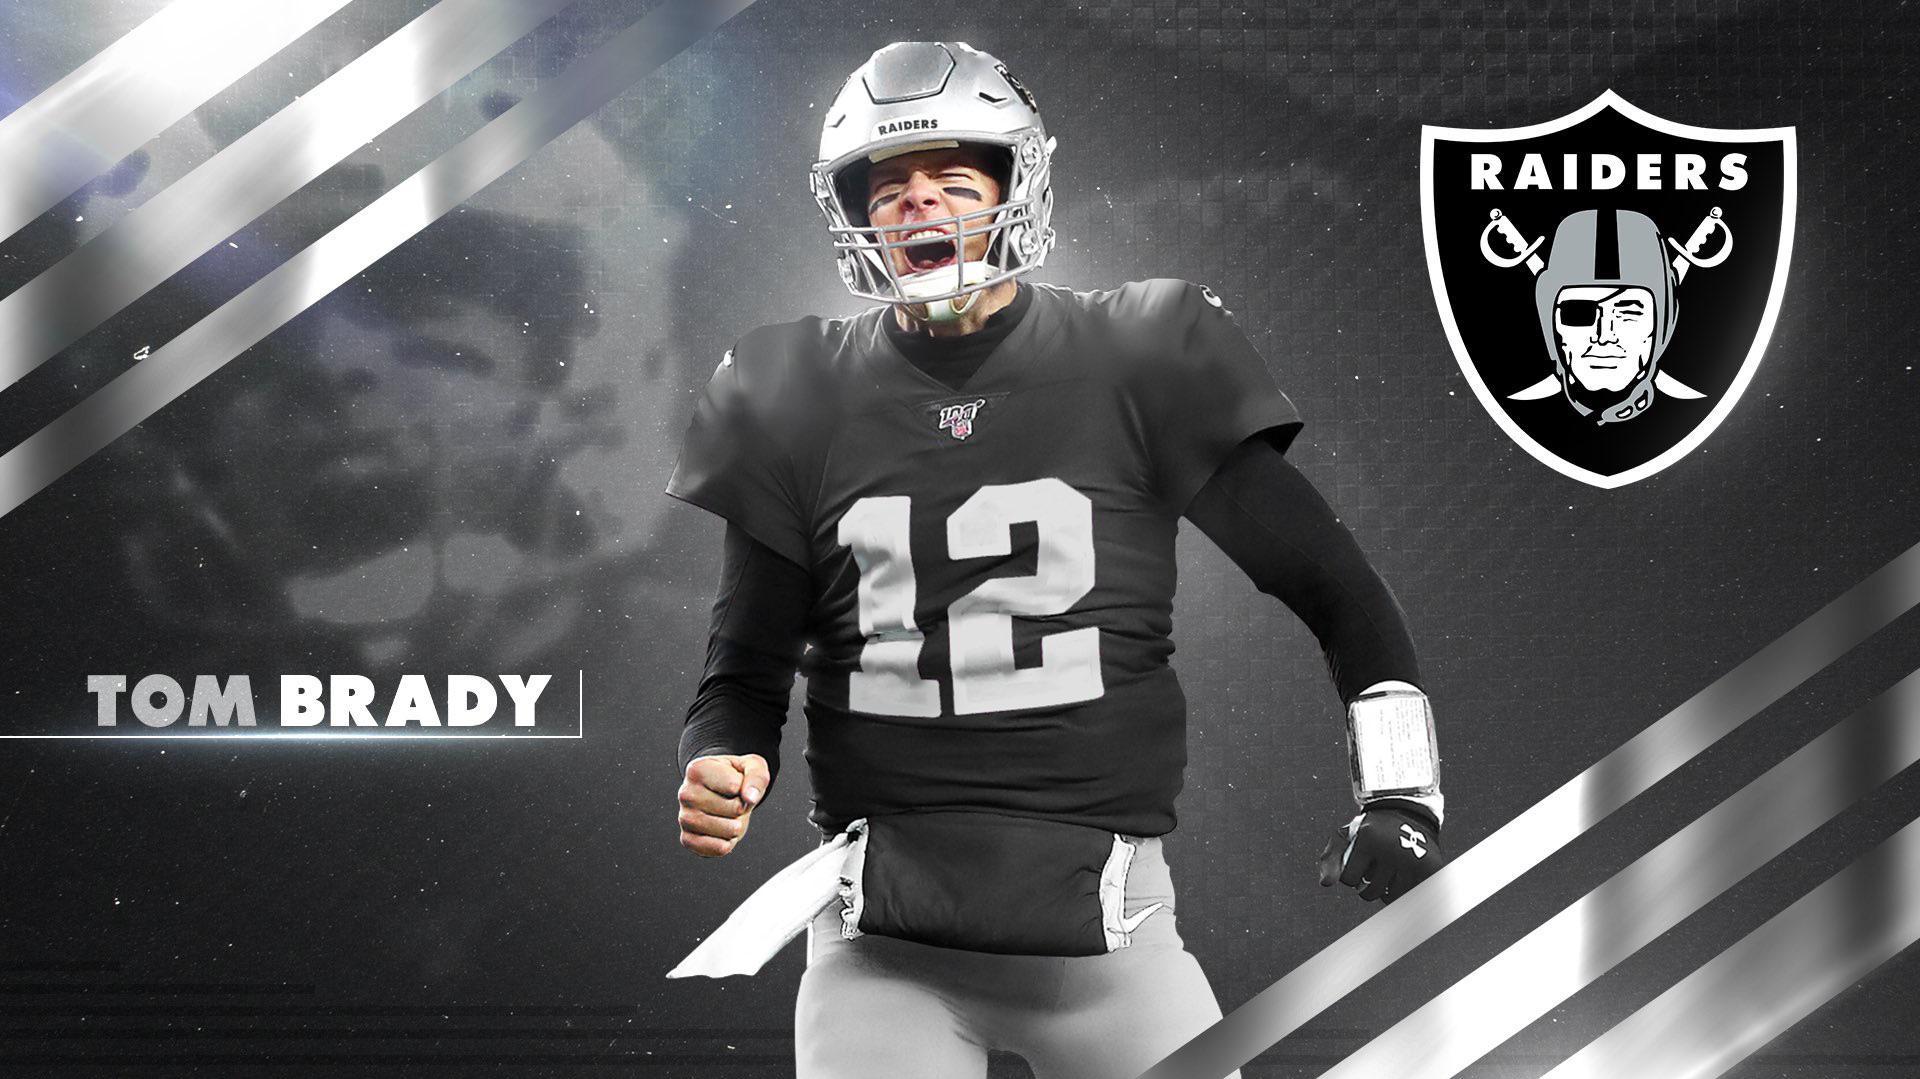 Free download Tom Brady will be the Raiders starting QB in 2023